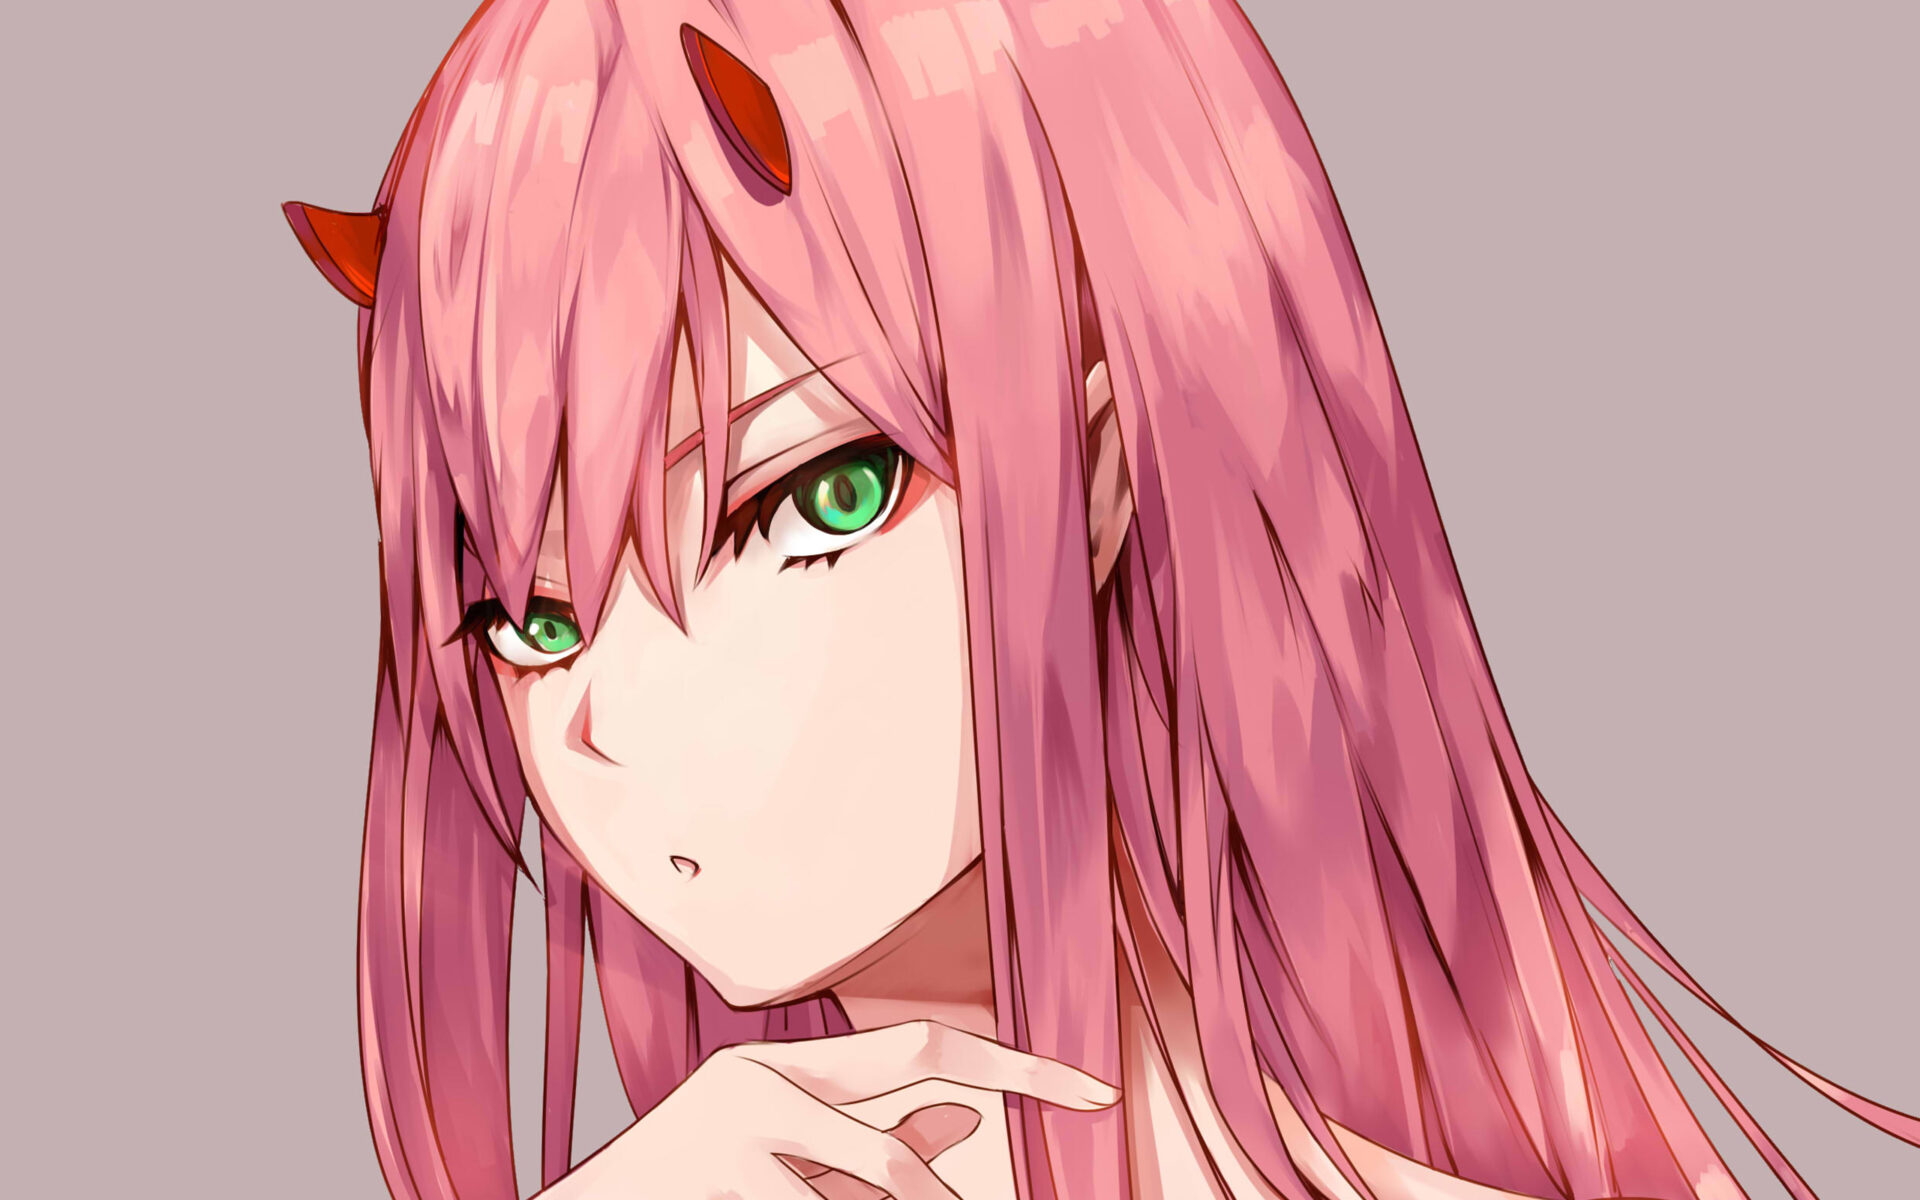 zero-two-manga-anime-characters-pink-hair-darling-in-the-franxx